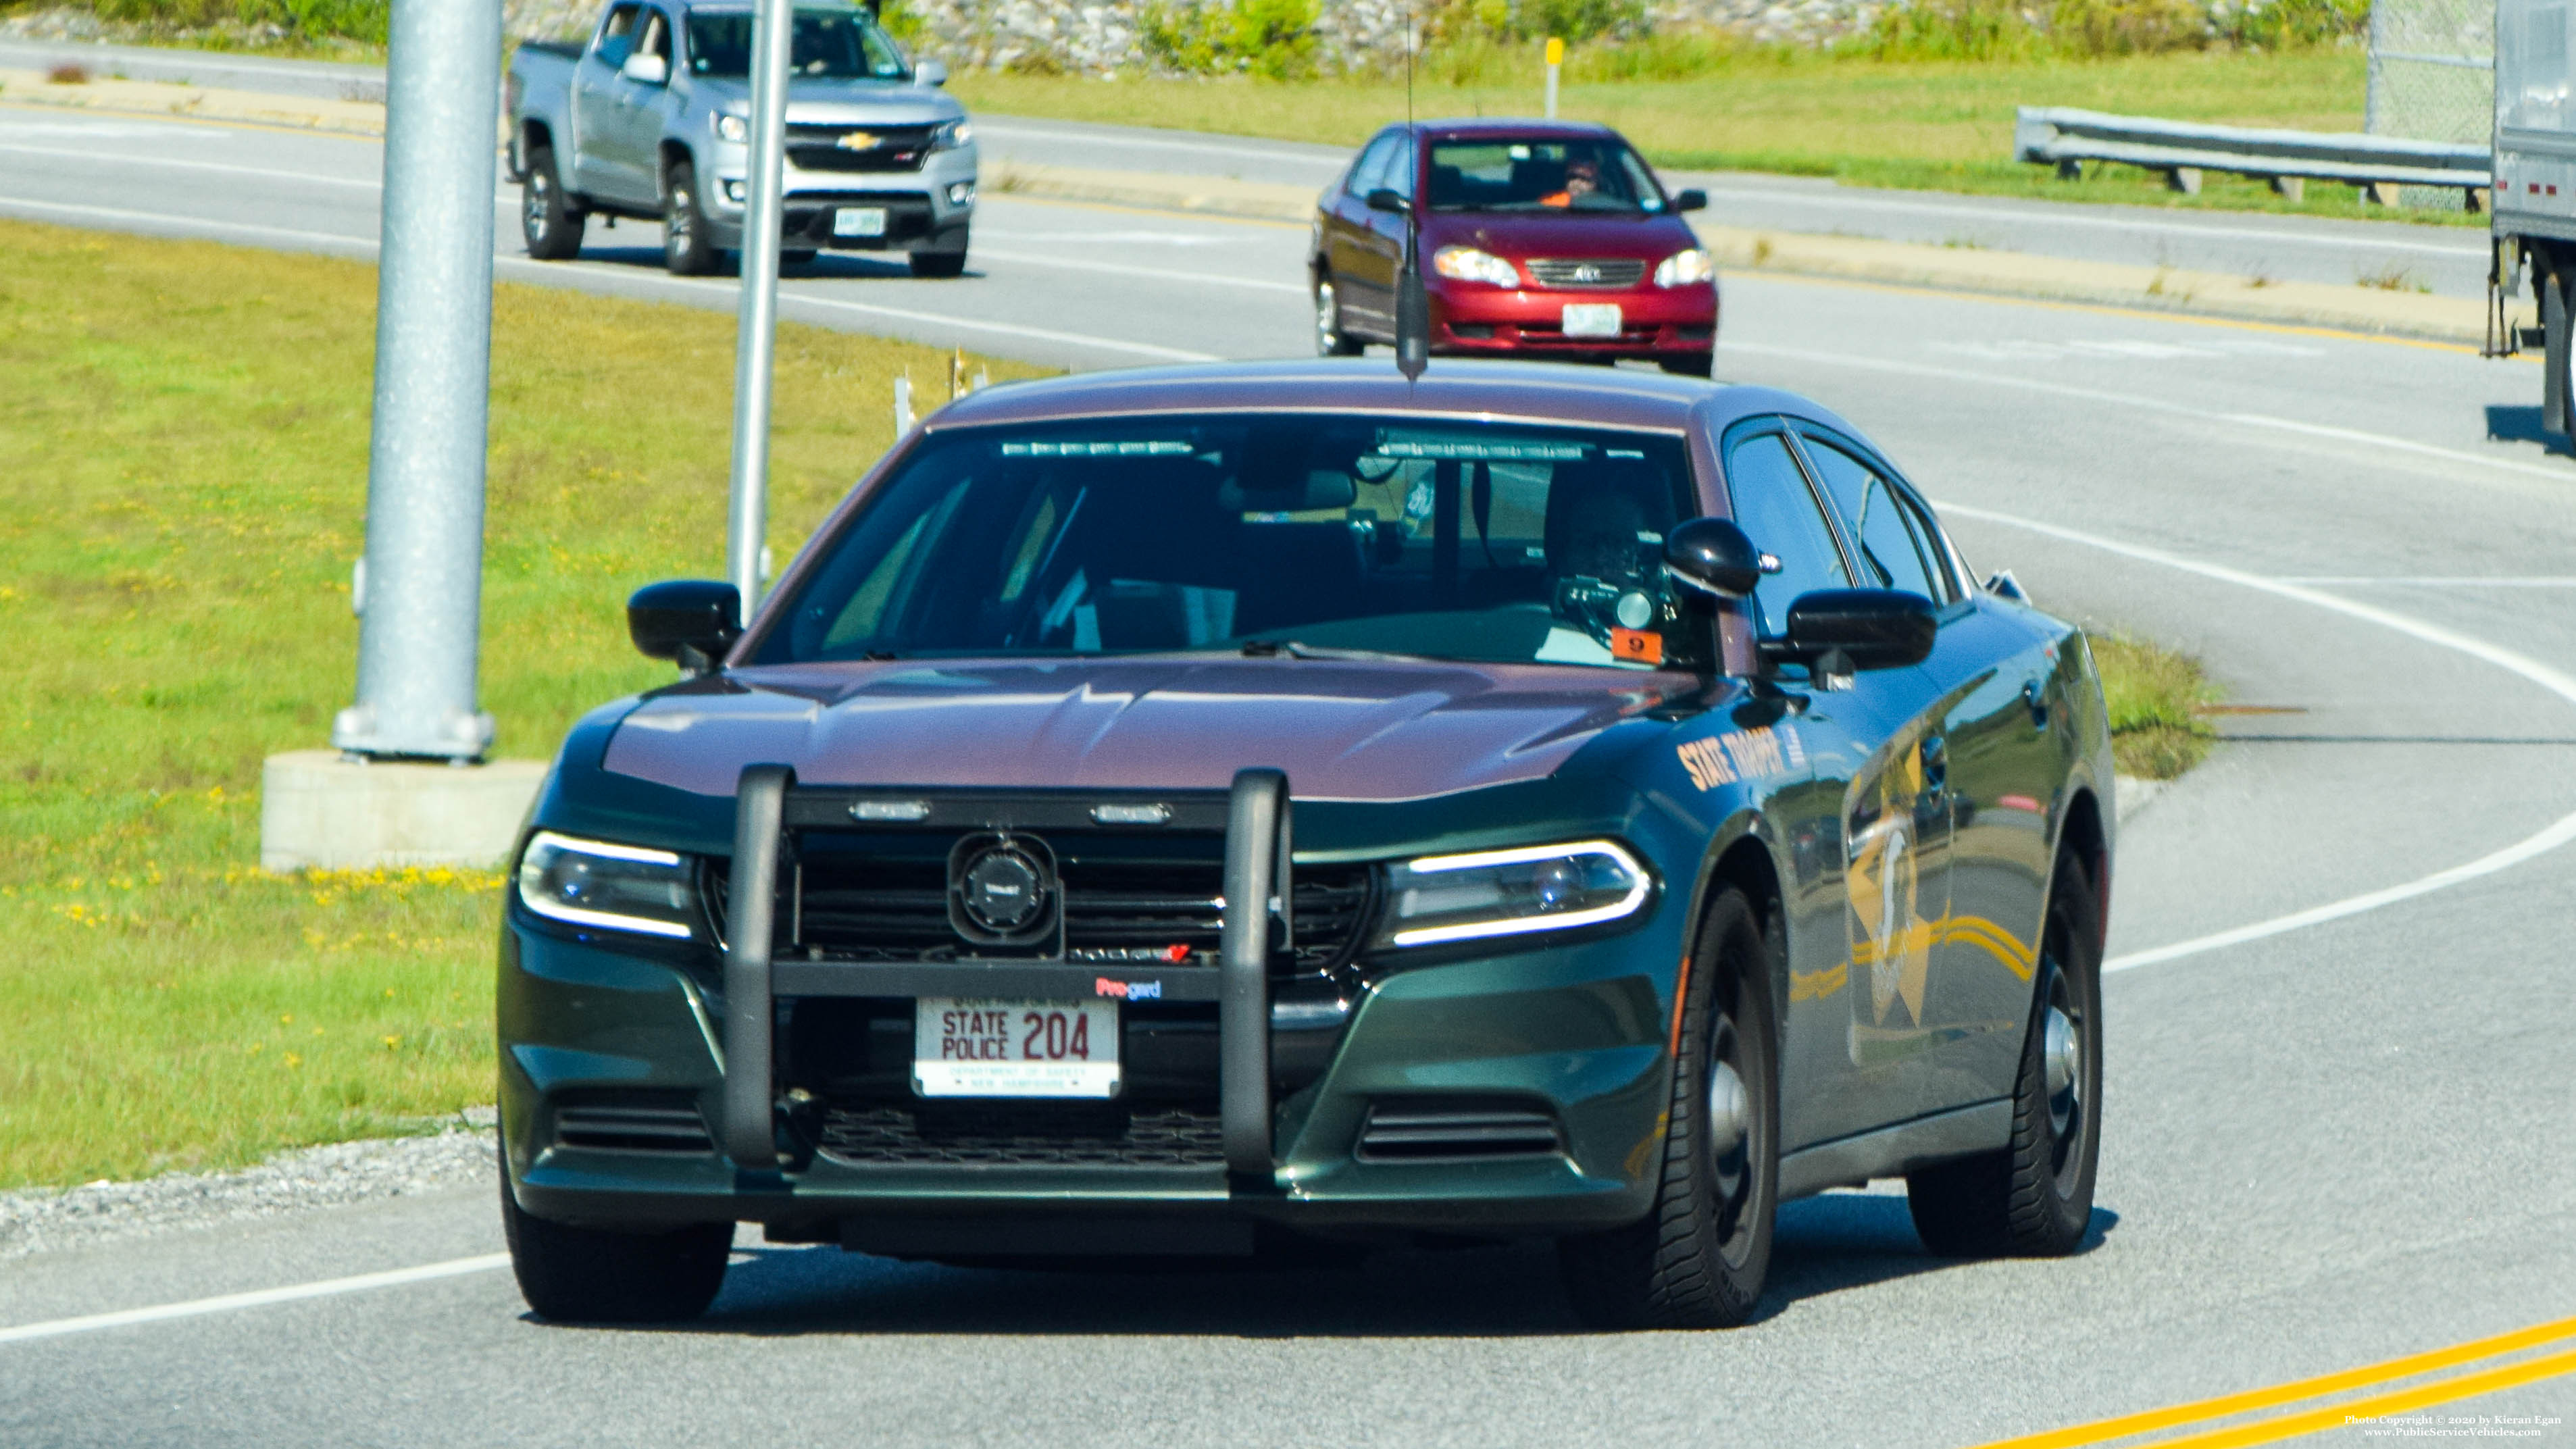 A photo  of New Hampshire State Police
            Cruiser 204, a 2015-2019 Dodge Charger             taken by Kieran Egan